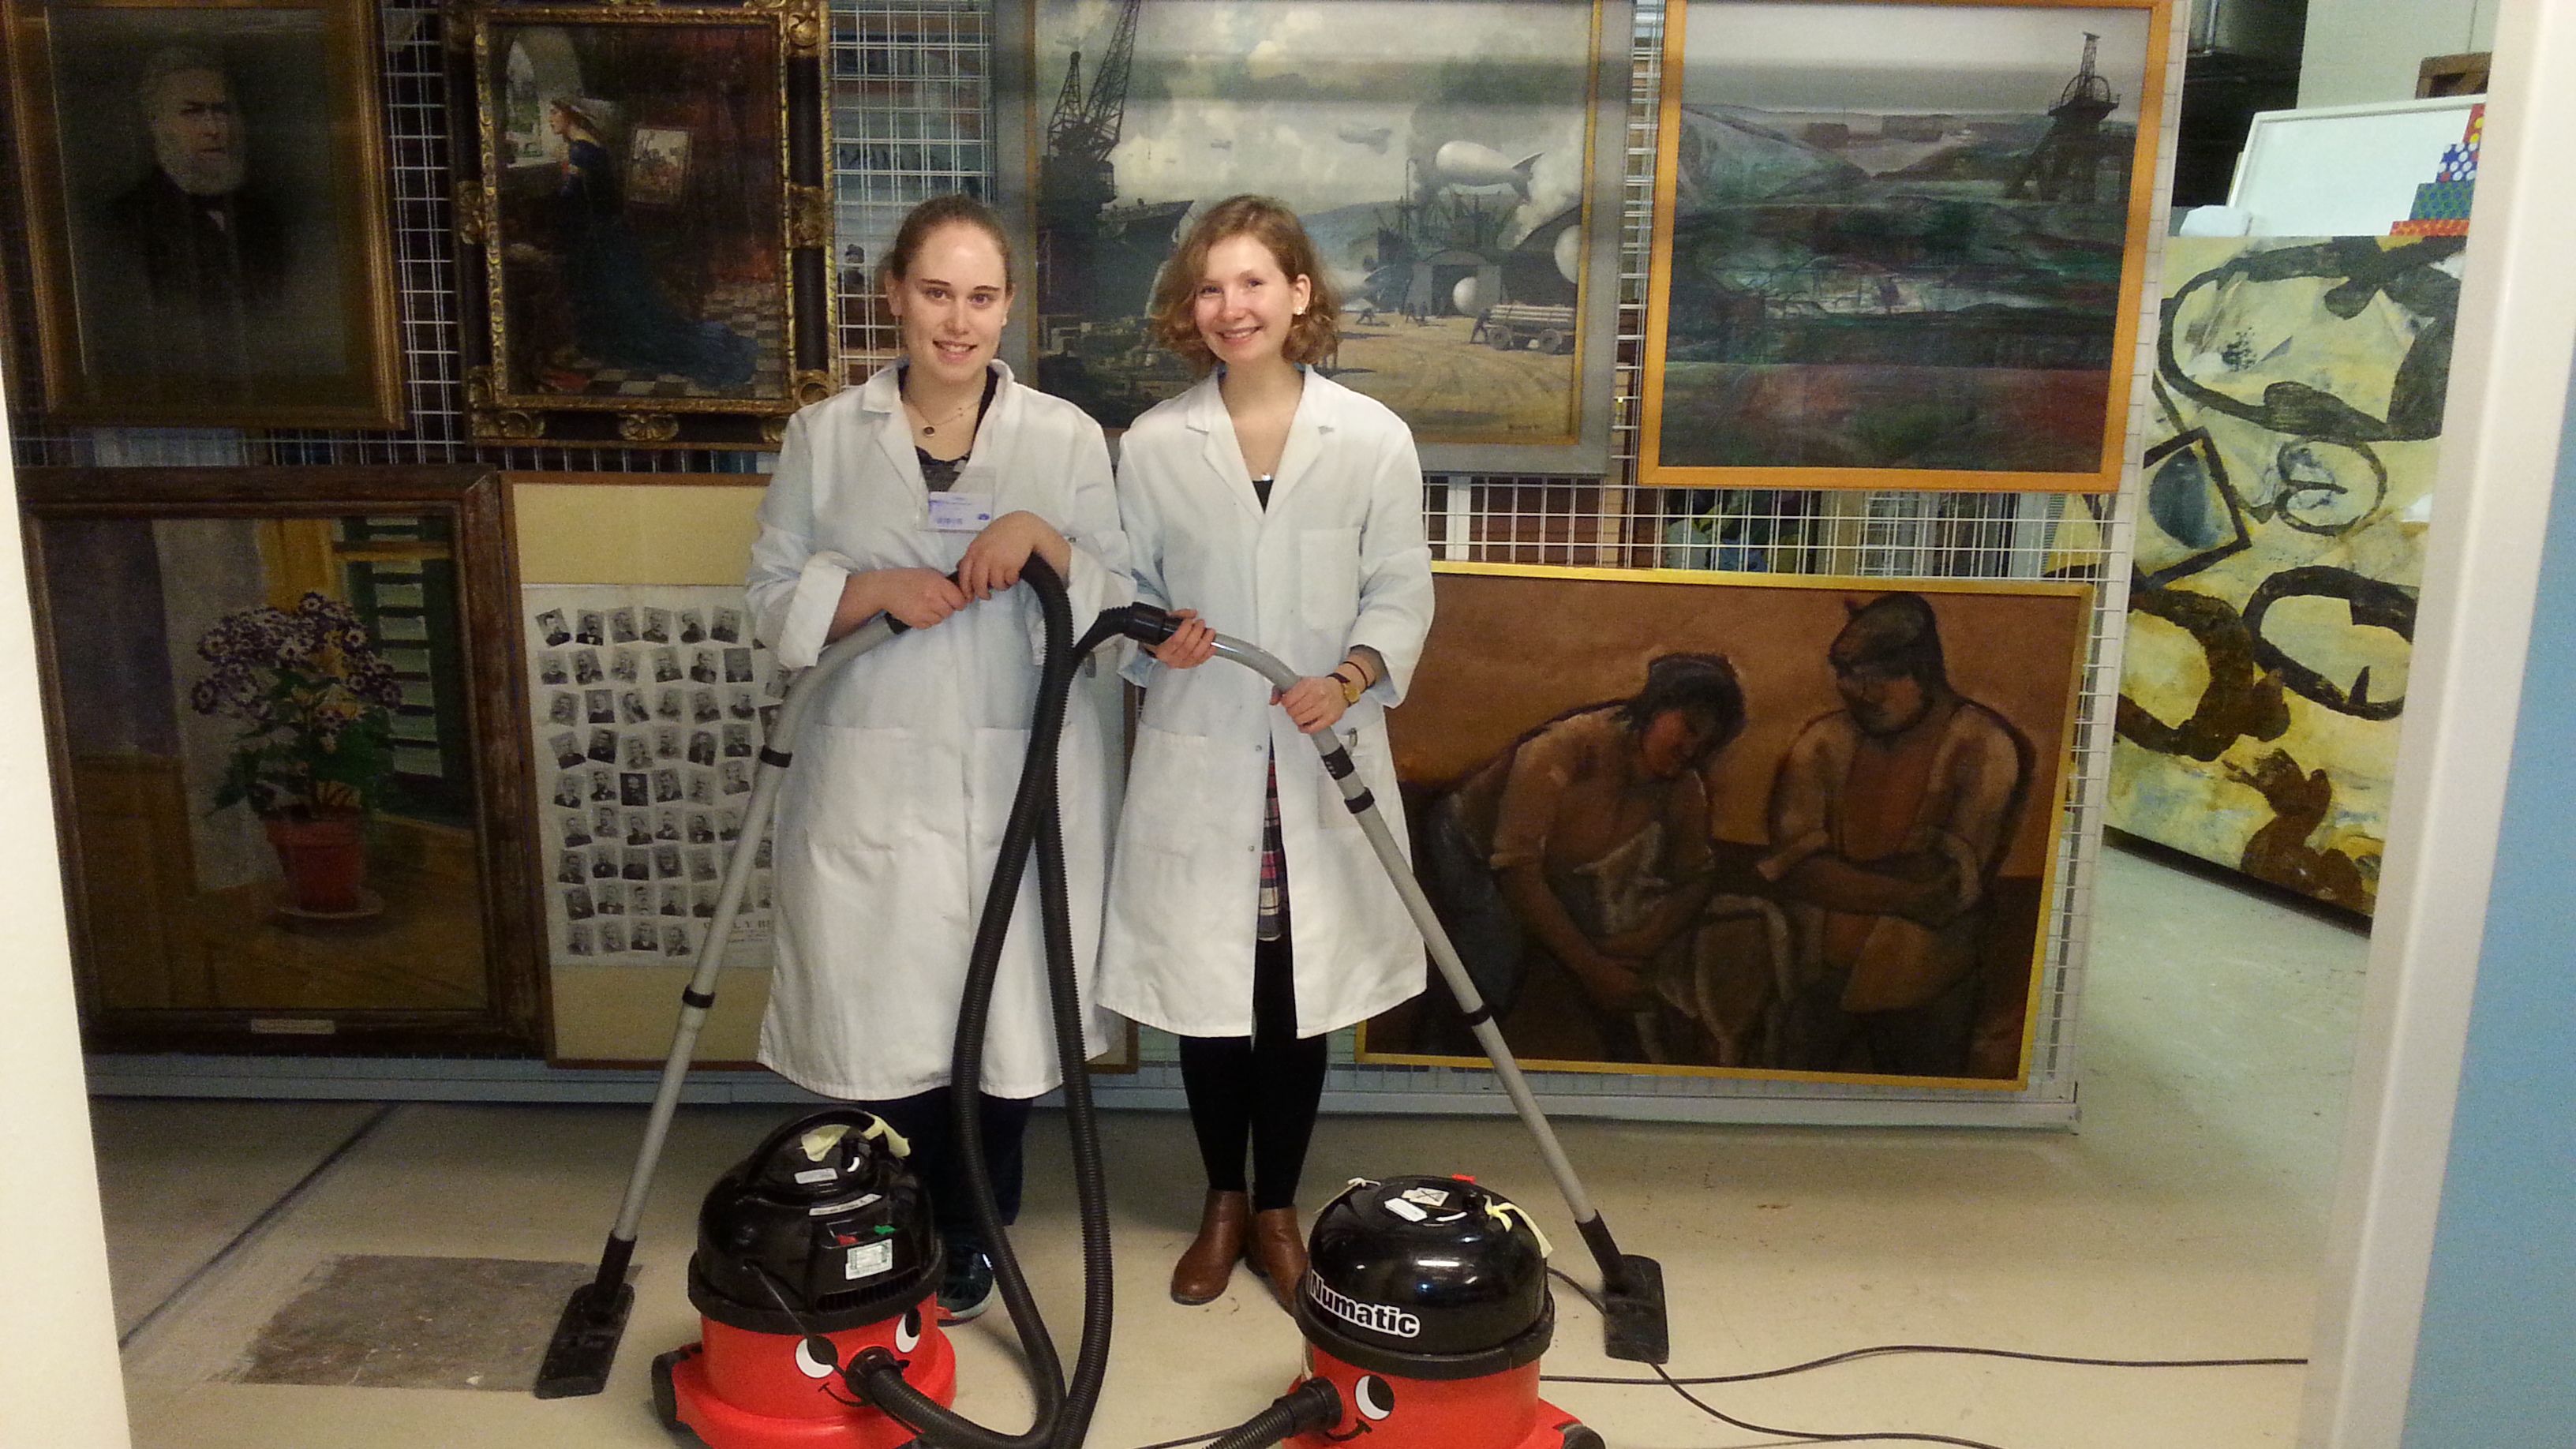 Volunteers Elizabete and Meredith helping with housekeeping in one of our Art stores.